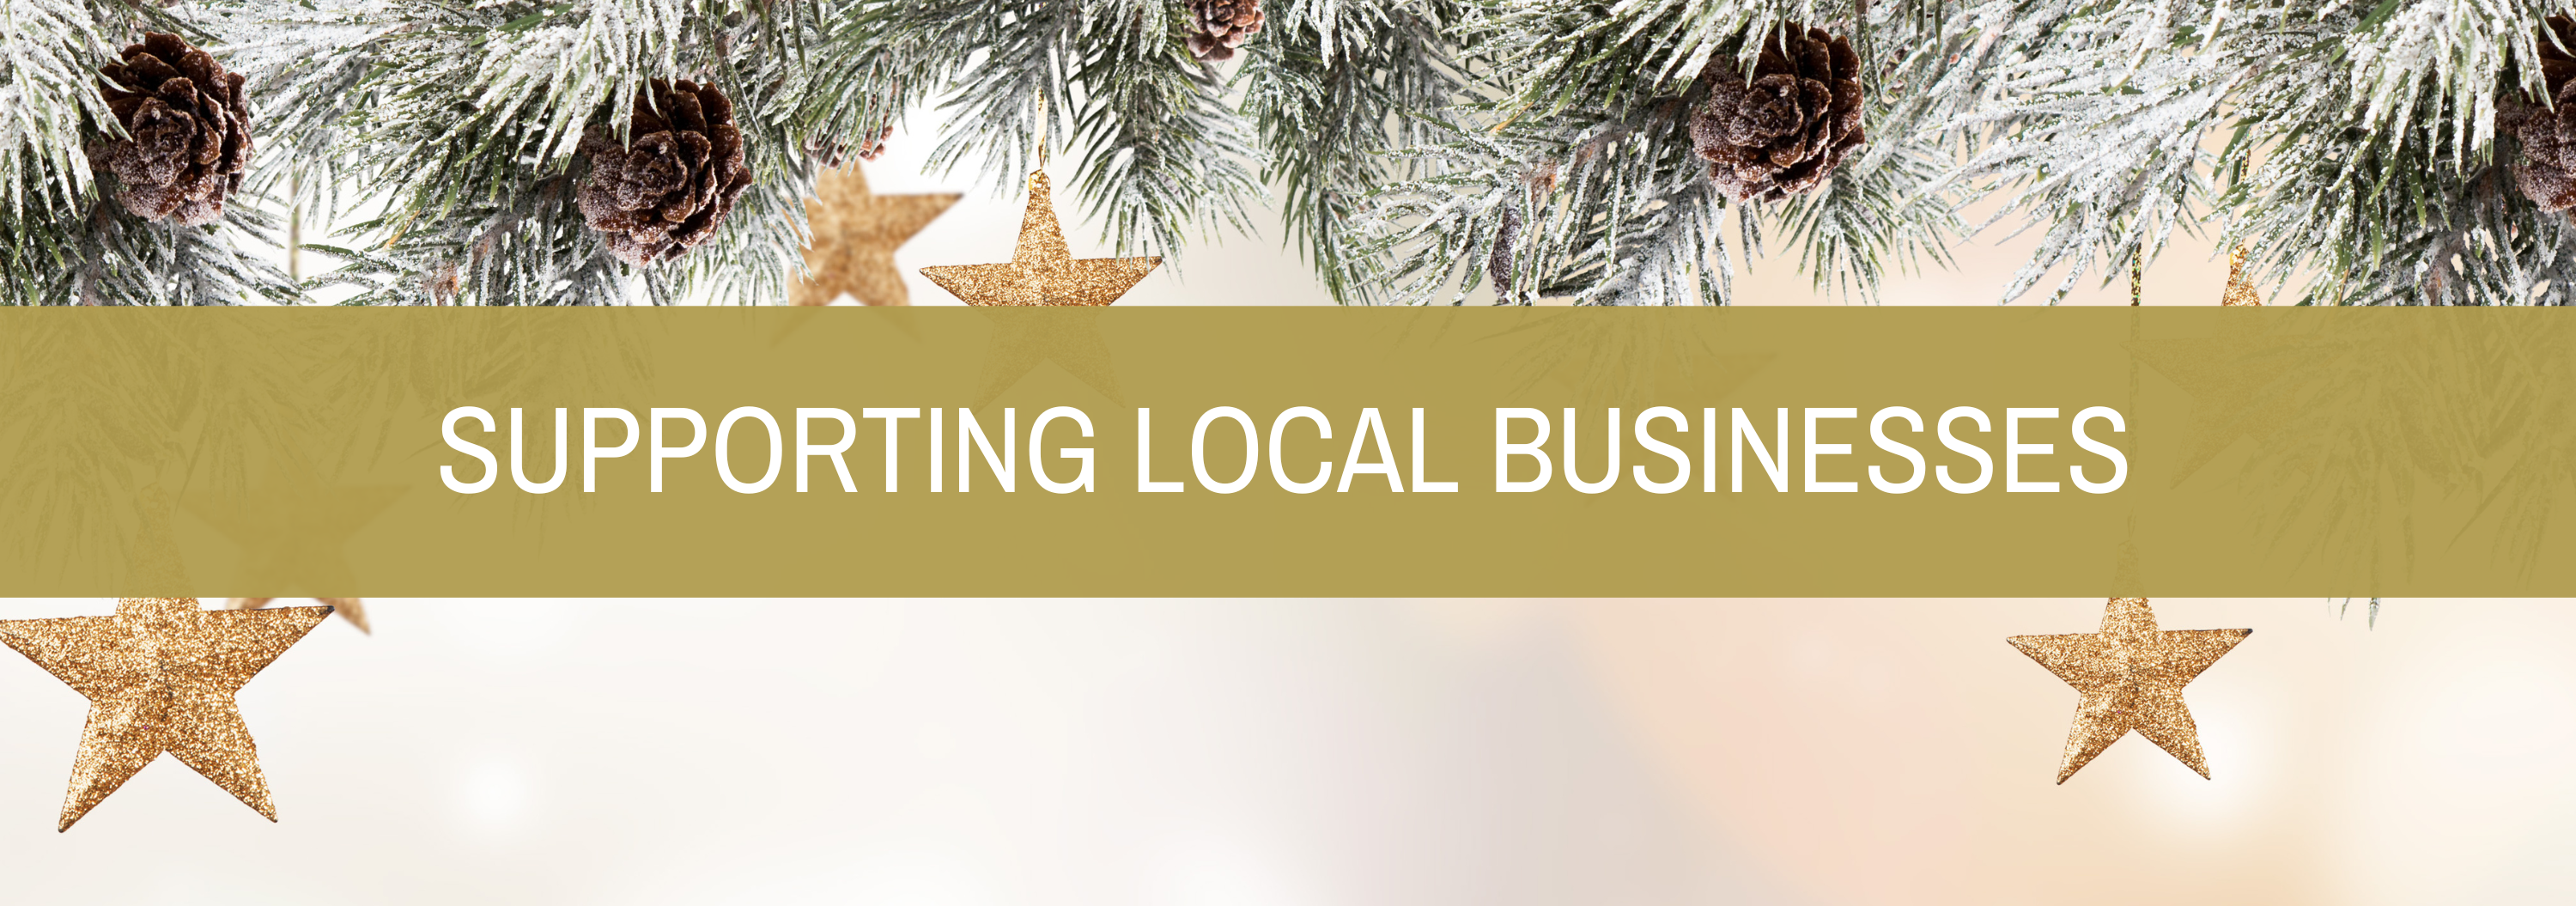 Support Local Businesses at Christmas